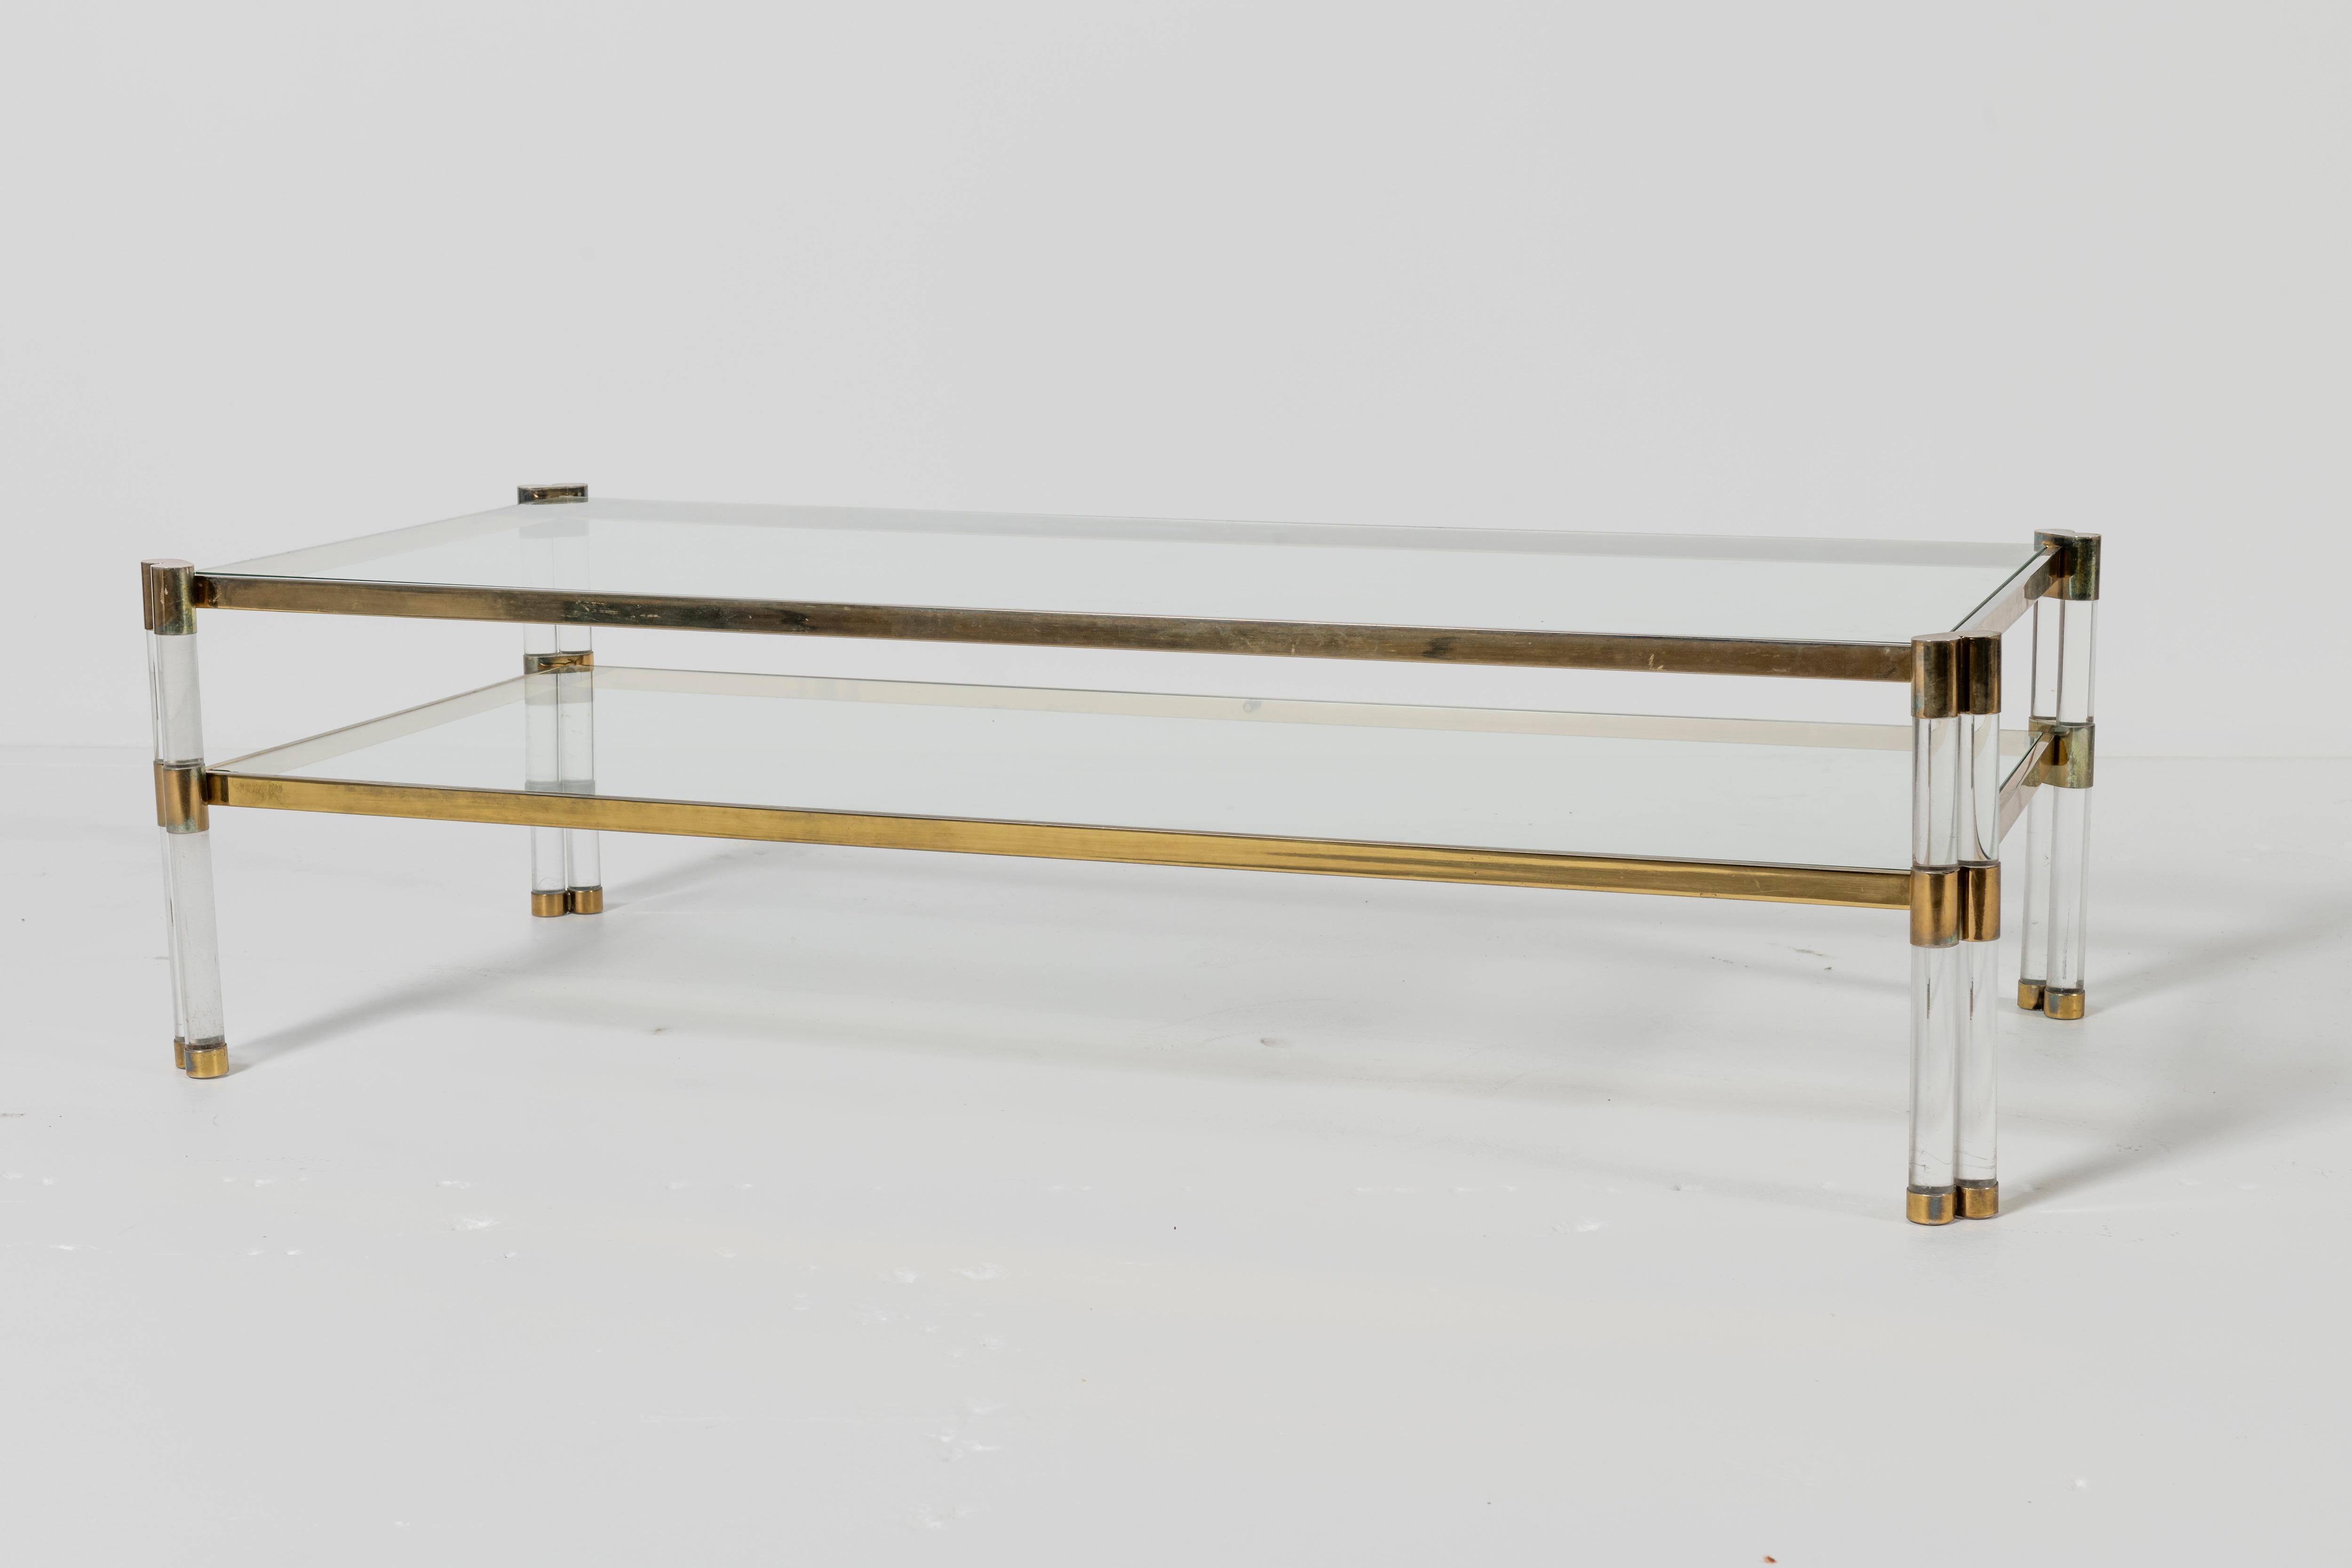 Vintage Karl Springer coffee table with shelf in lucite, glass, and brass. Shelf adds a layer for books or other objects, creating additional functionality.